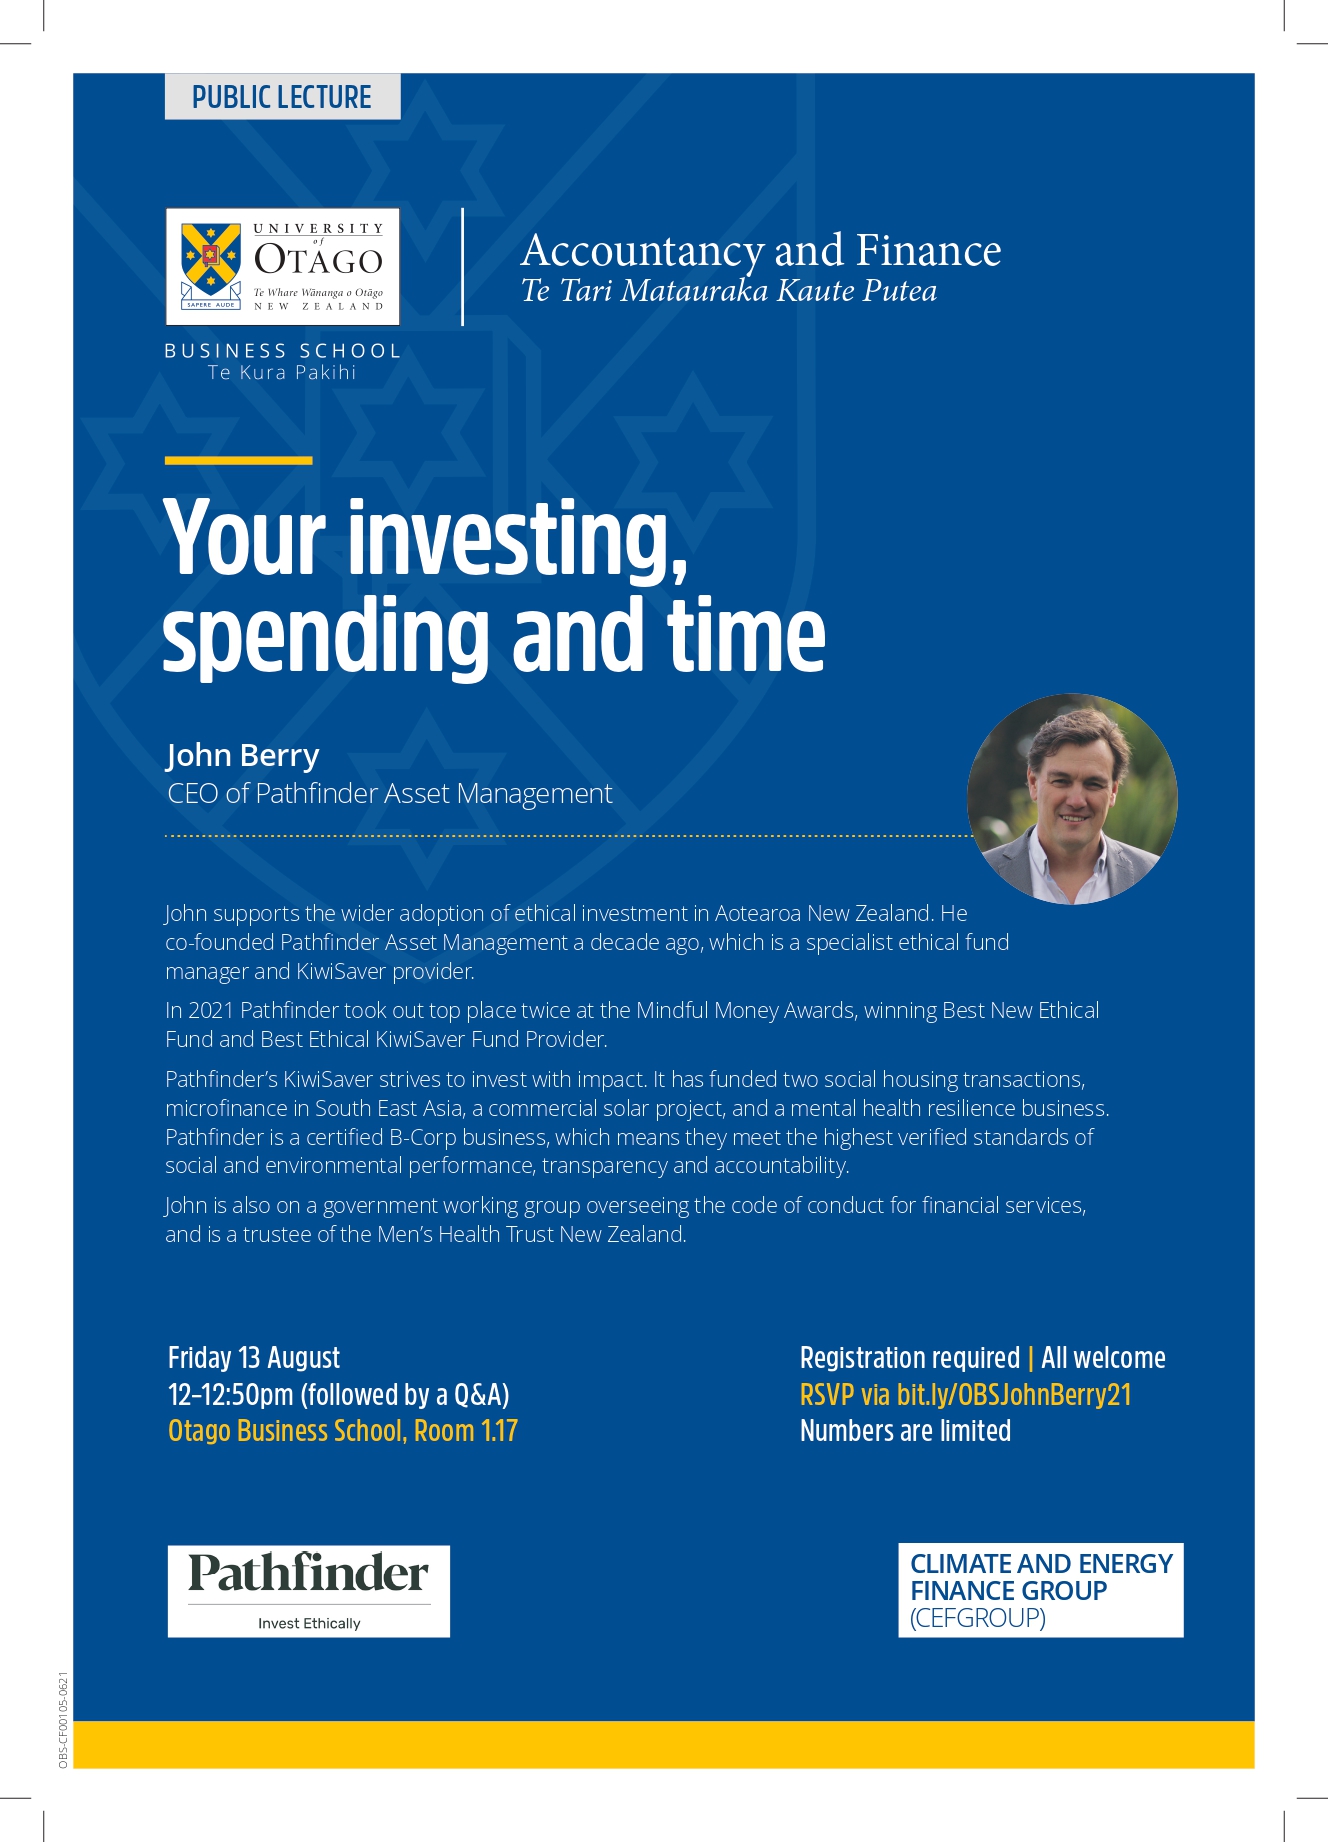 CEFGroup Public Lecture | Your Investing, Spending and Time @ Otago Business School Seminar Room 1.17